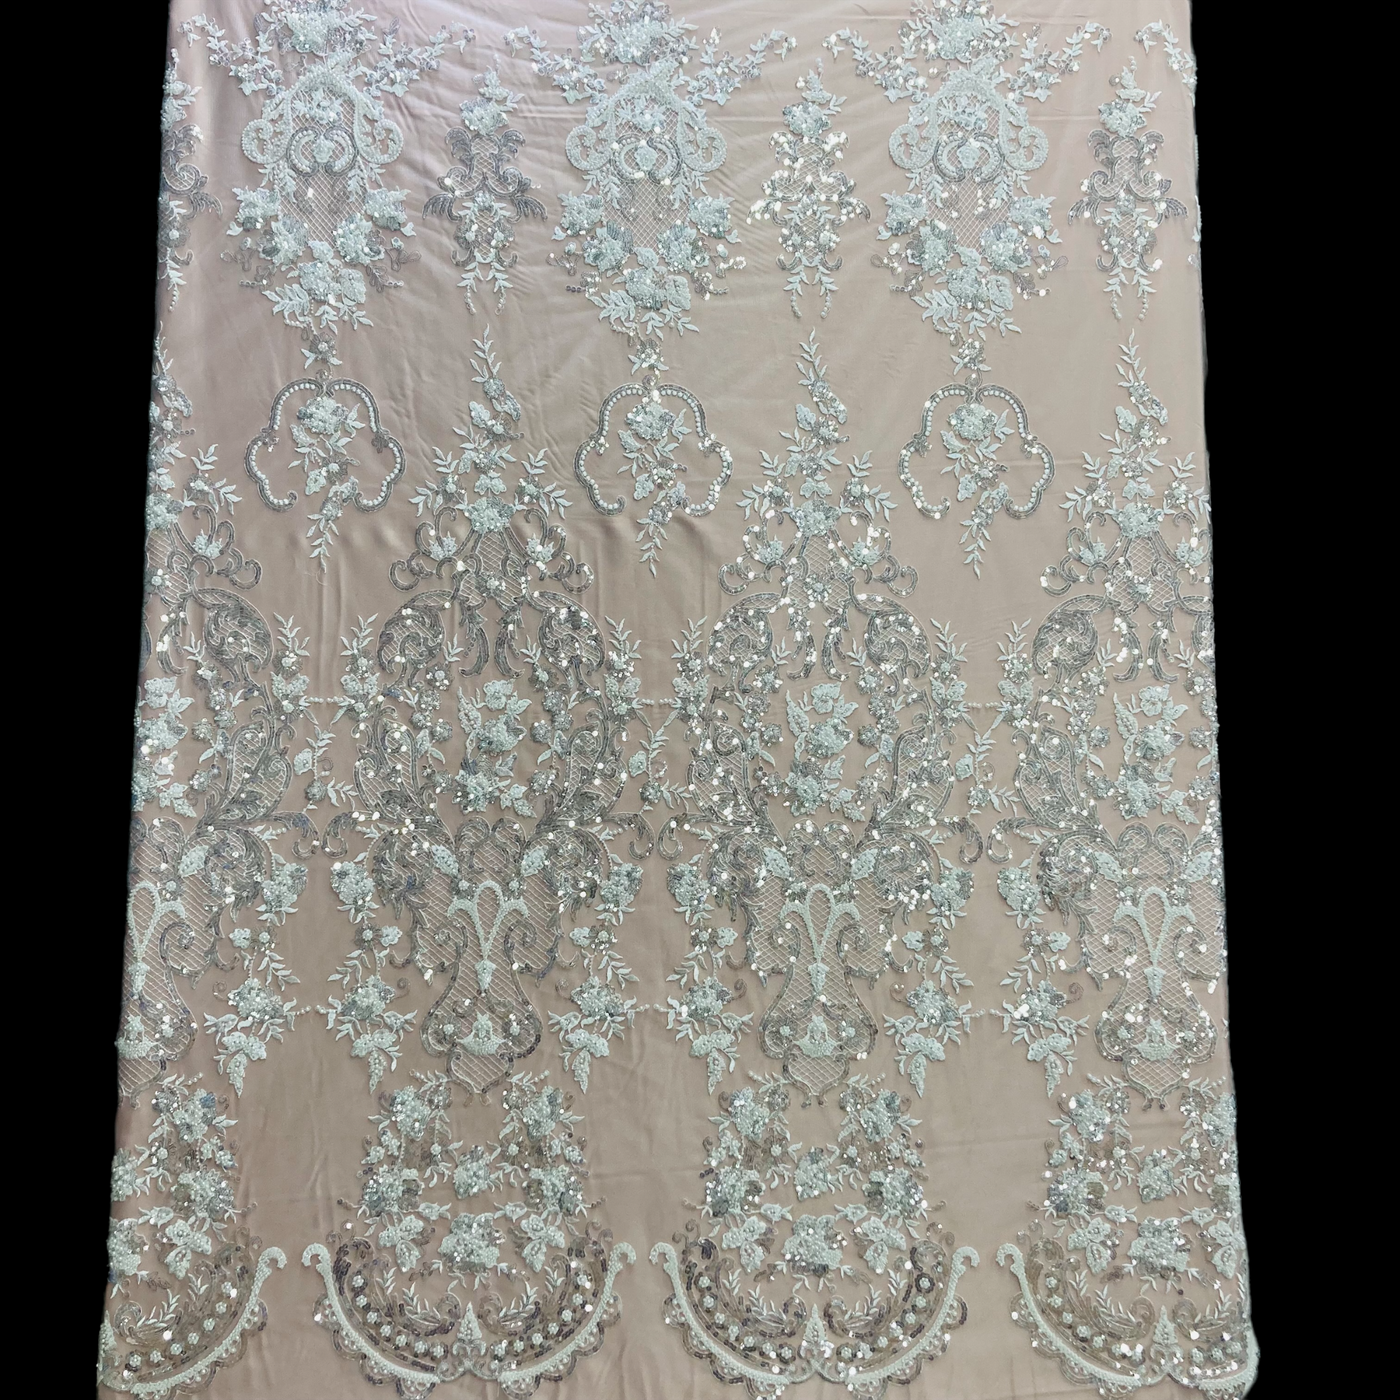 Beaded Lace Fabric Embroidered on 100% Polyester Net Mesh | Lace USA - GD-210907 Off White